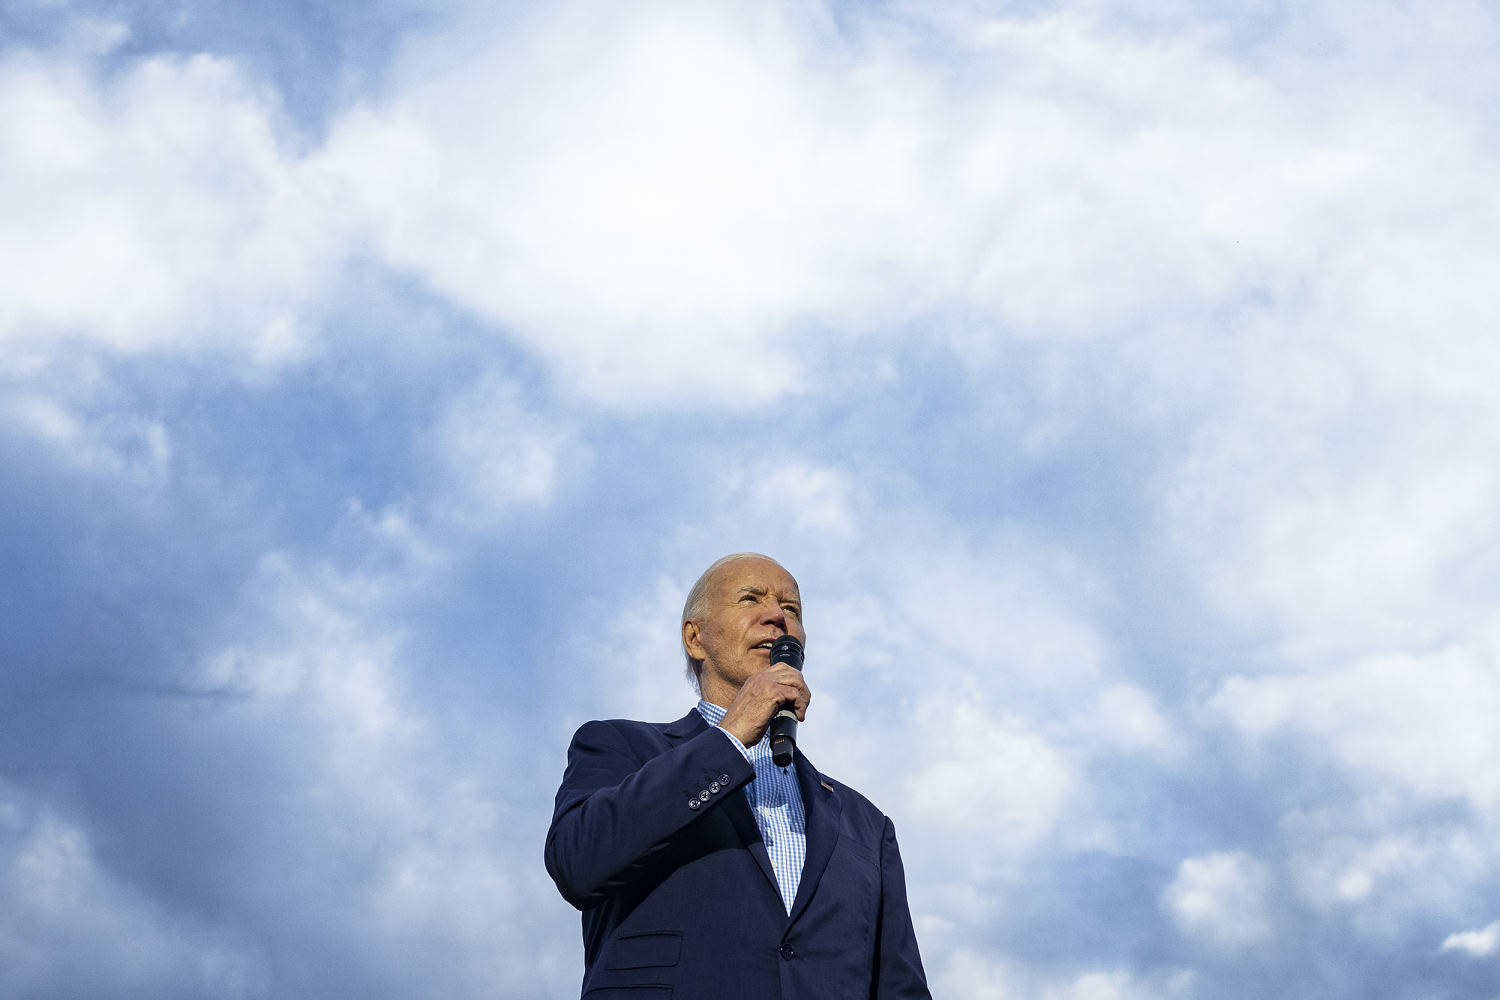 Democratic donors divided on what comes next, buying Biden more time